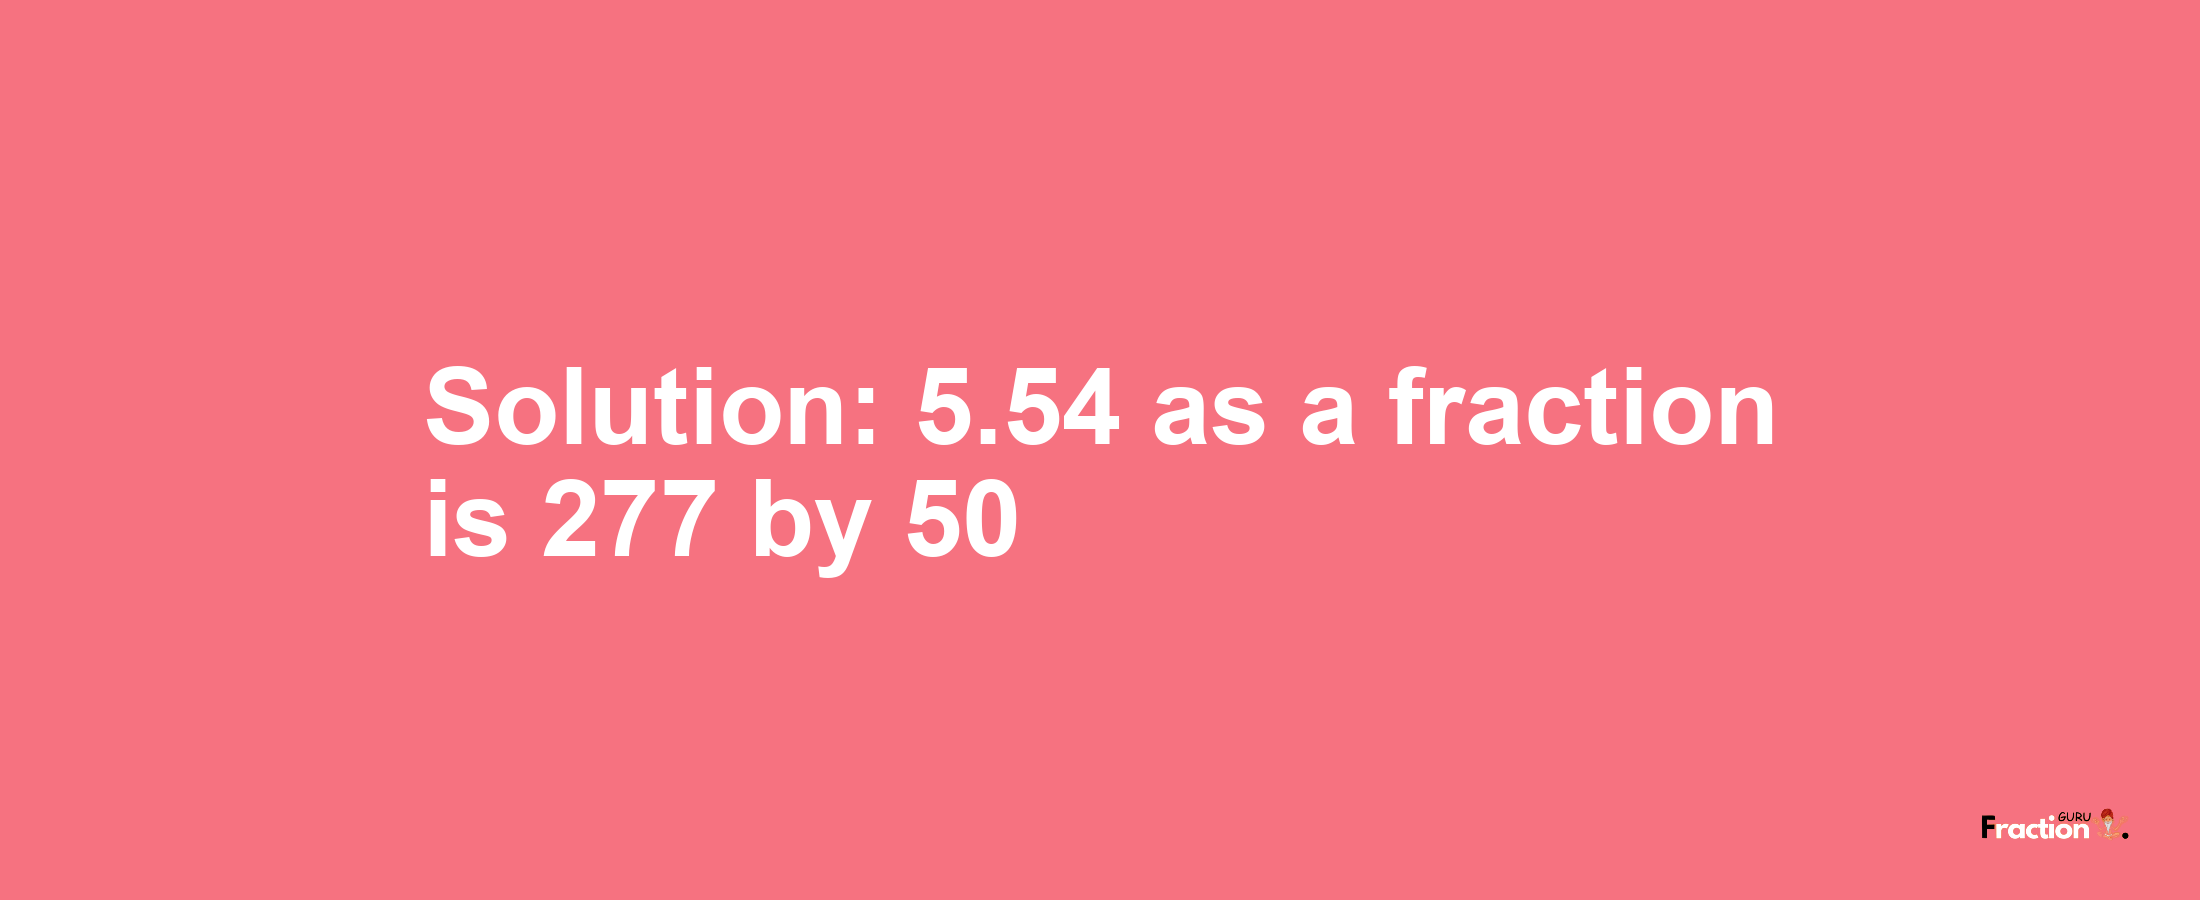 Solution:5.54 as a fraction is 277/50